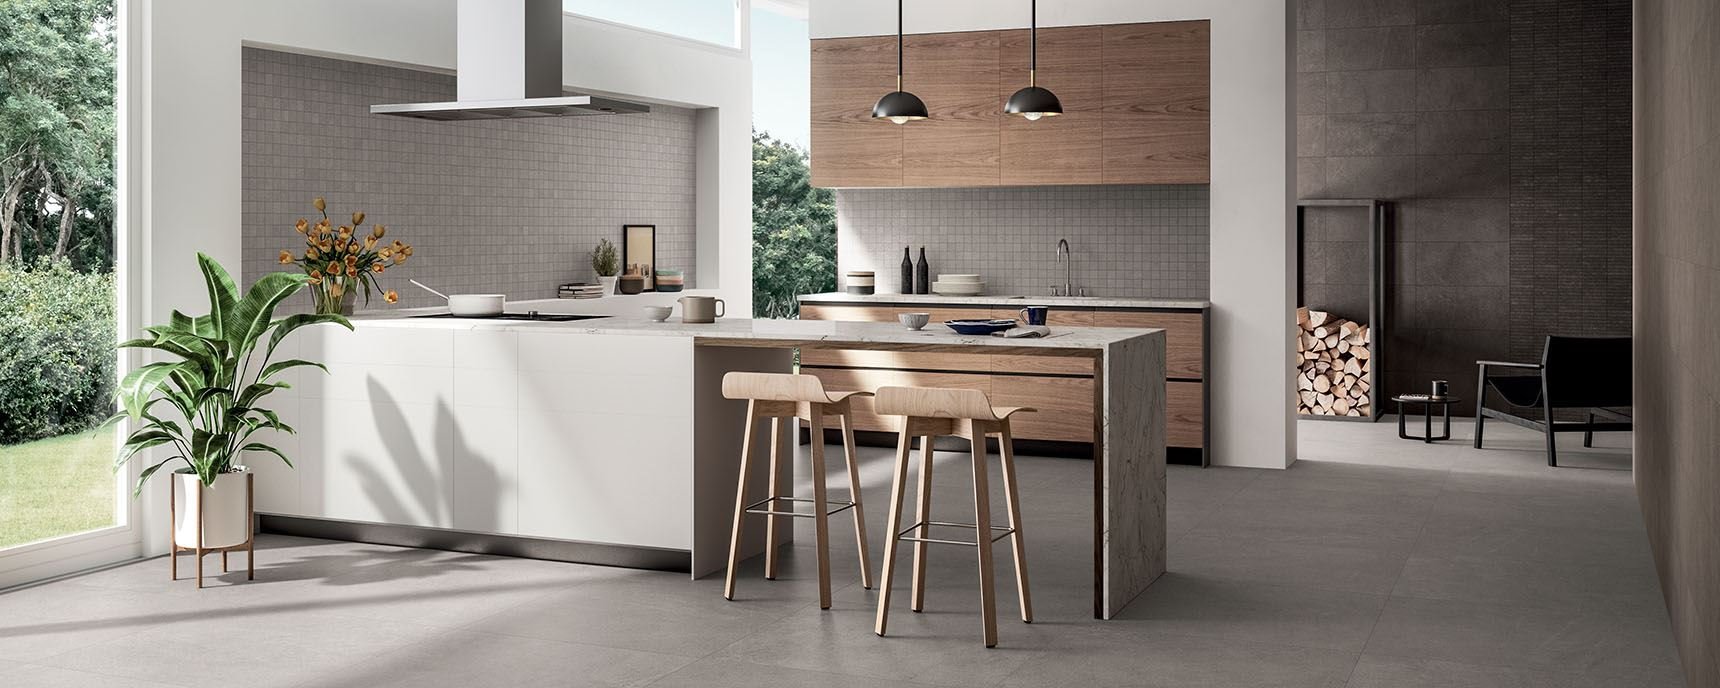 A modern kitchen: what are its characteristics?